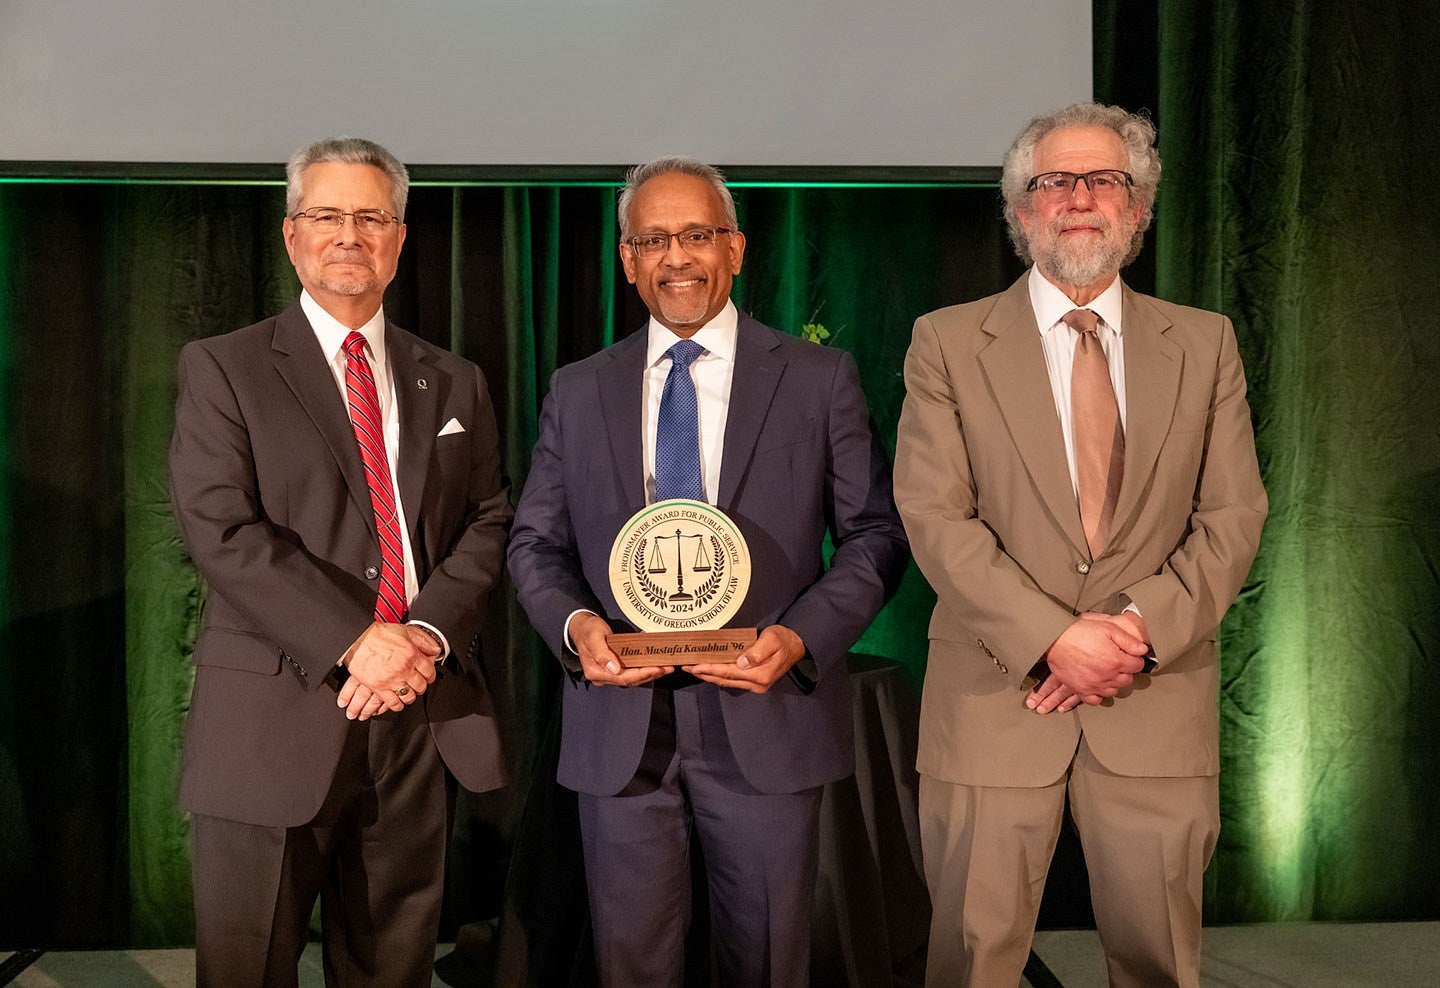 Judge John Acosta, Judge Mustafa T. Kasubhai holding the Frohnmayer Award, and attorney Marc Friedman standing in front of a green curtain.